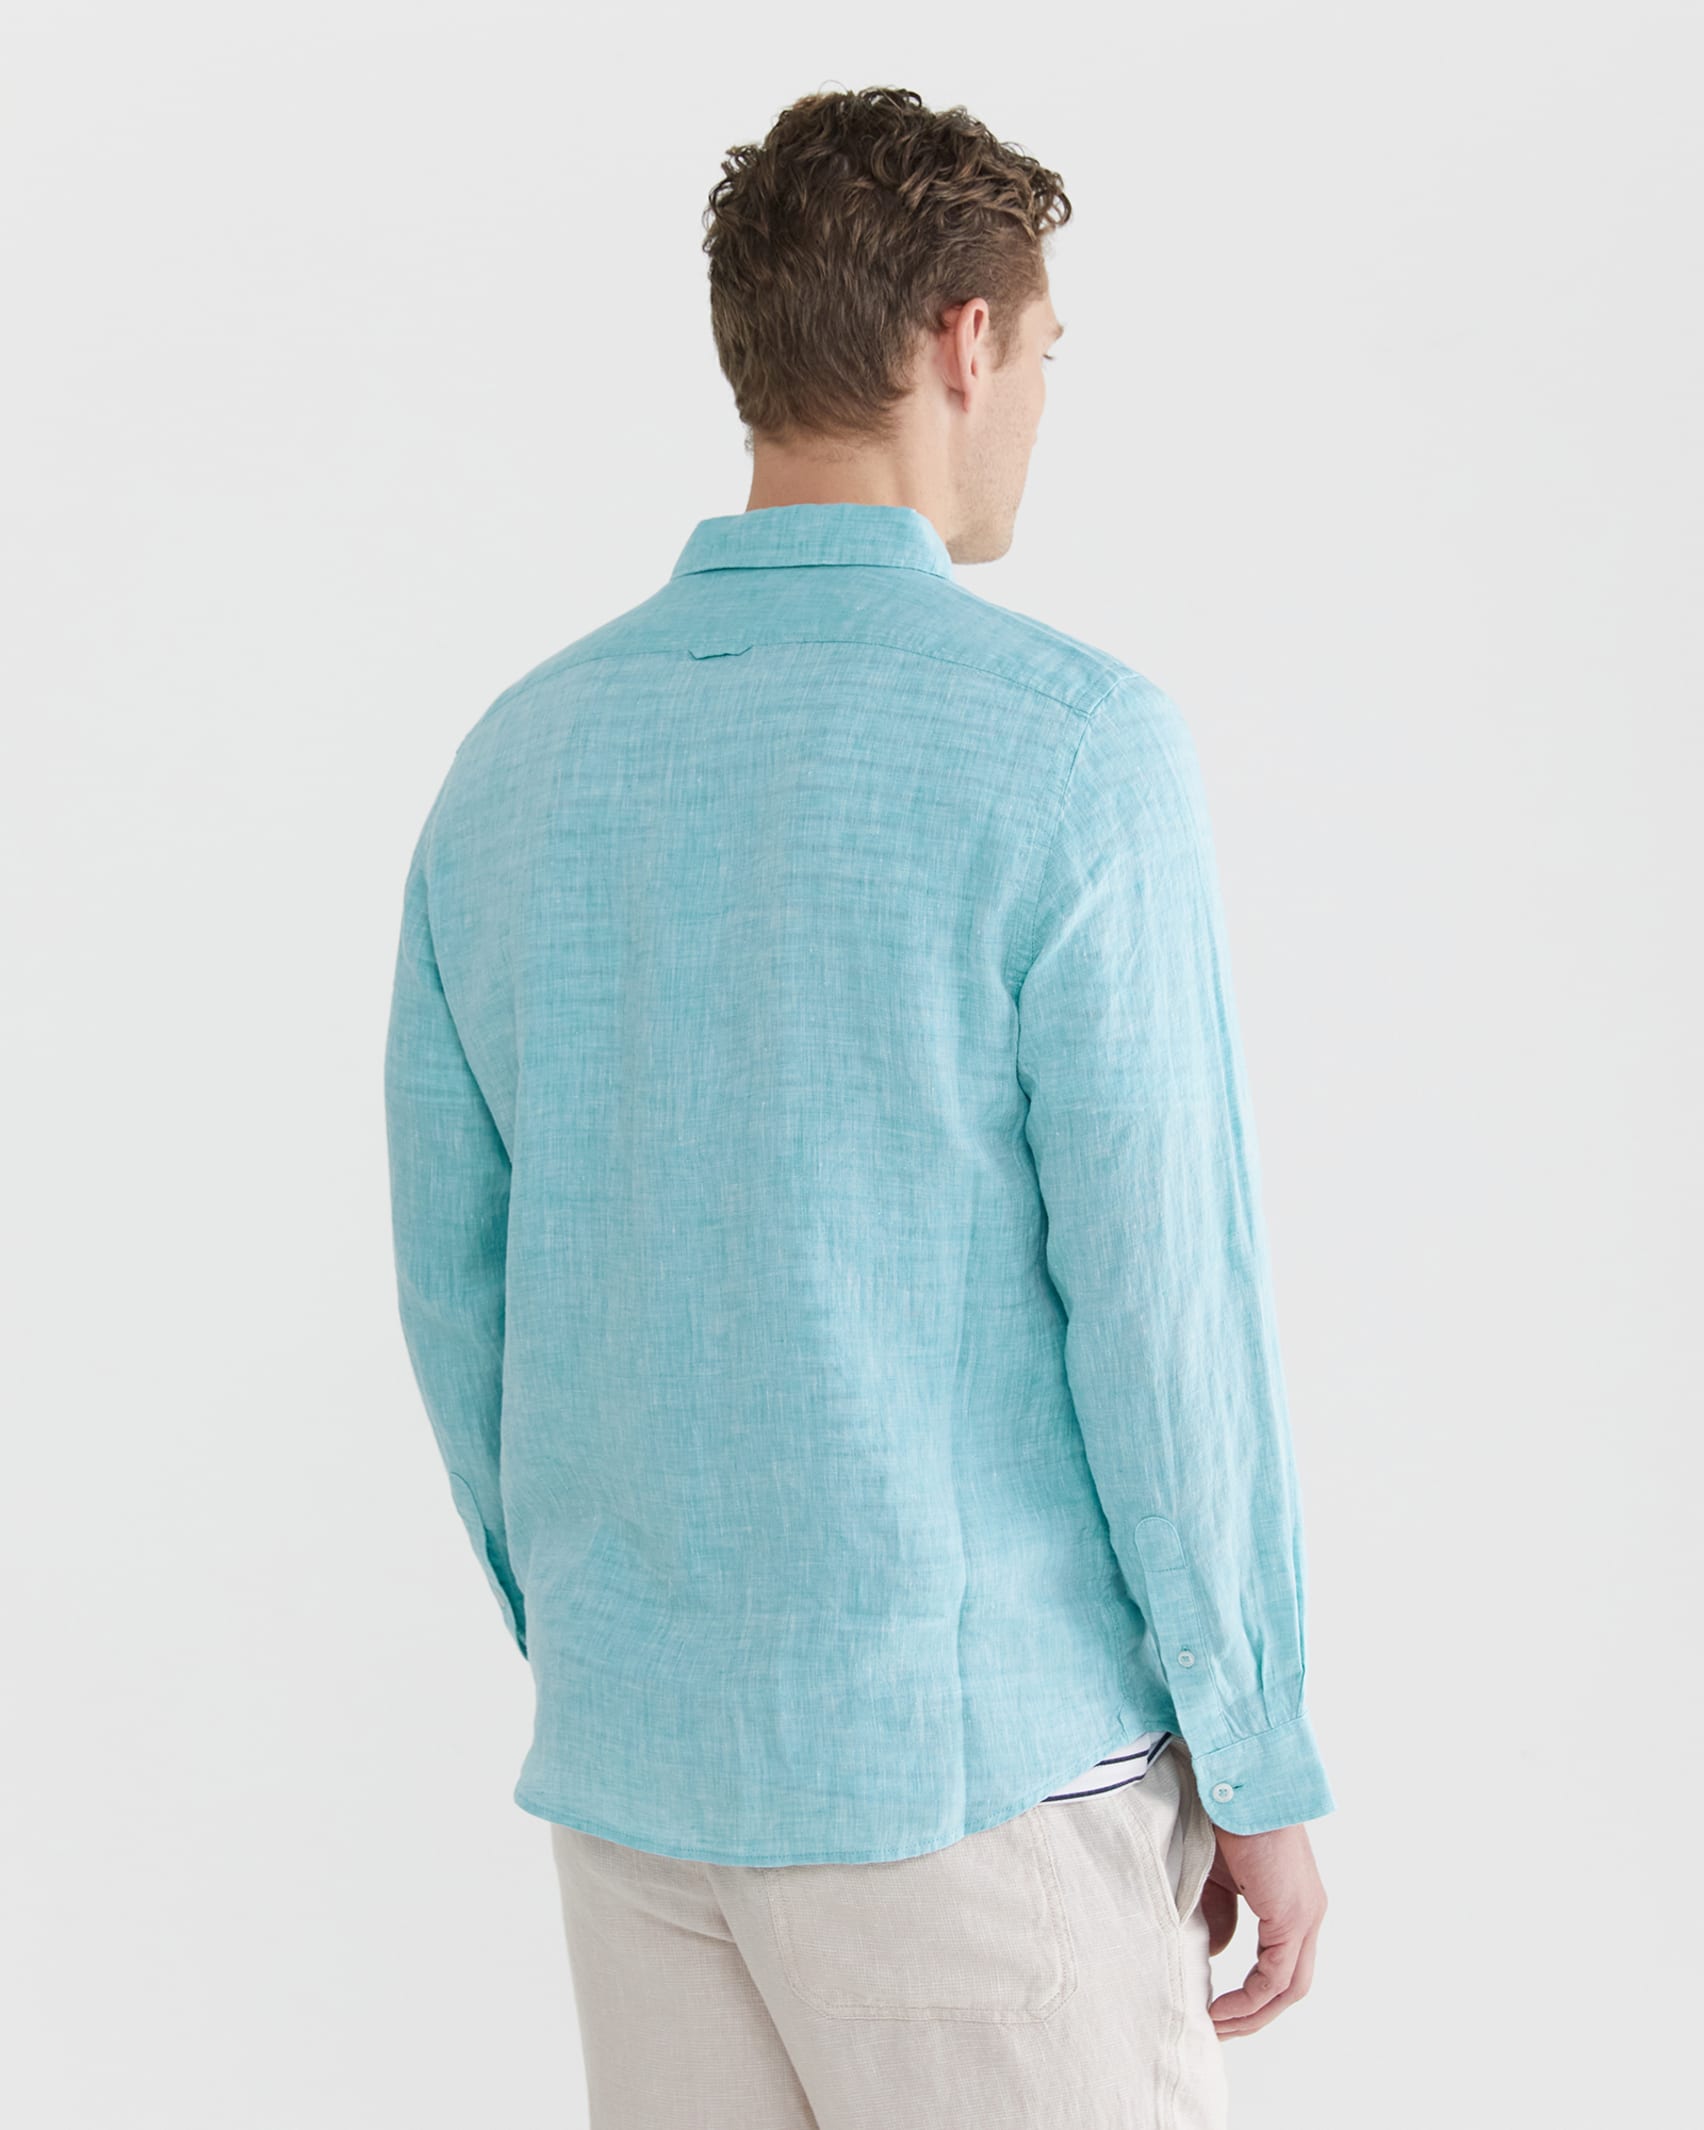 Yard Dyed Linen Shirt in TEAL